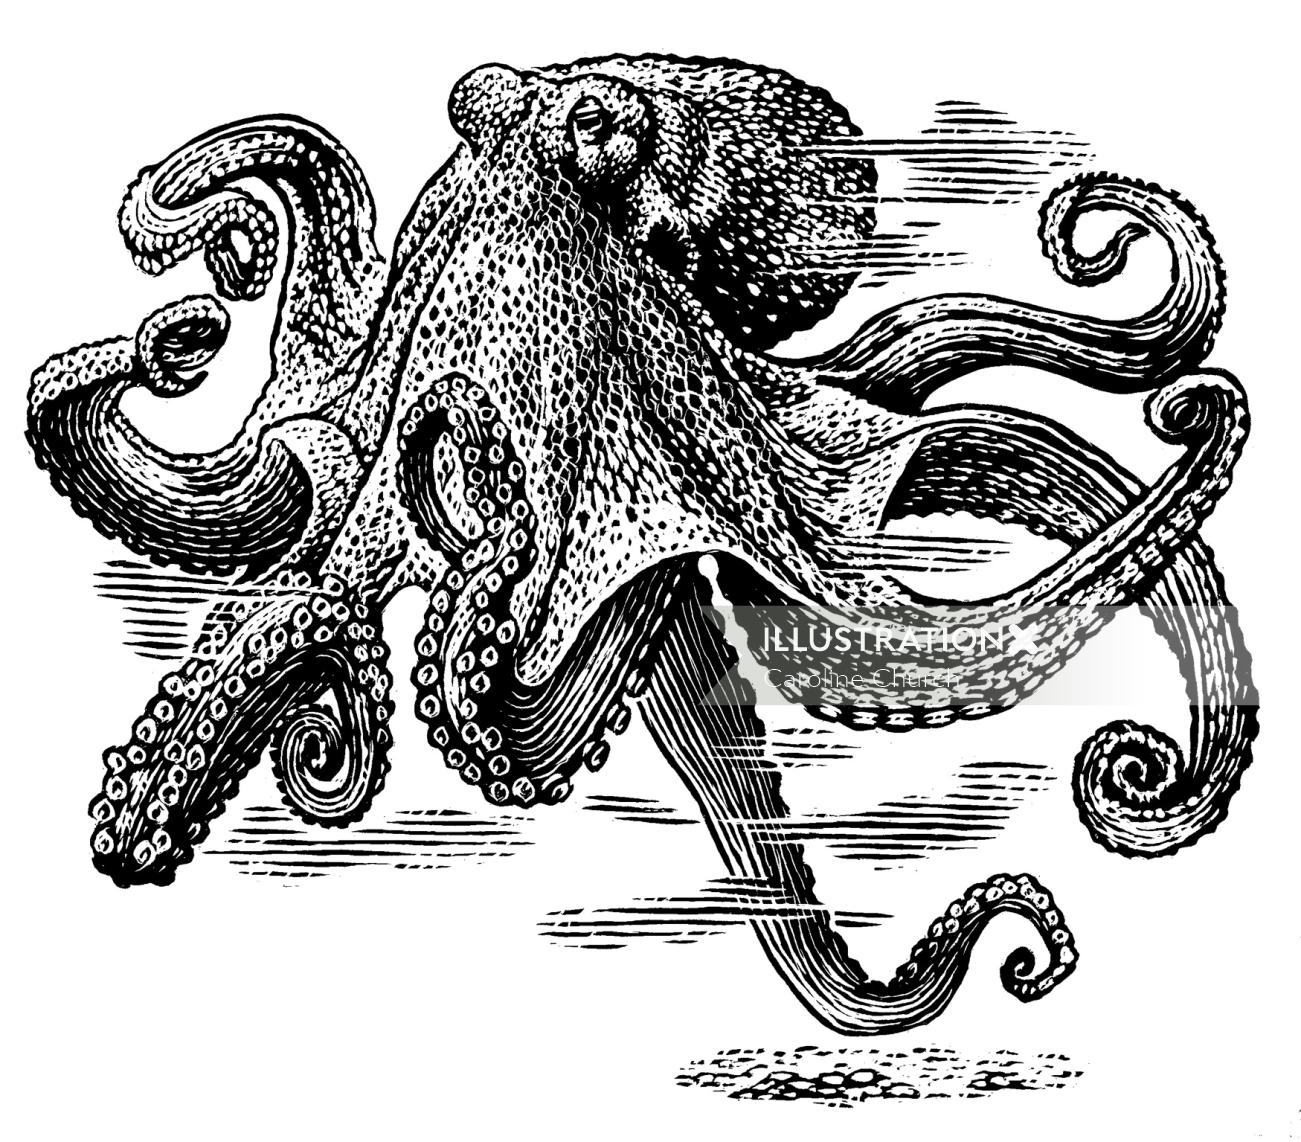 Black and white illustration of Octopus